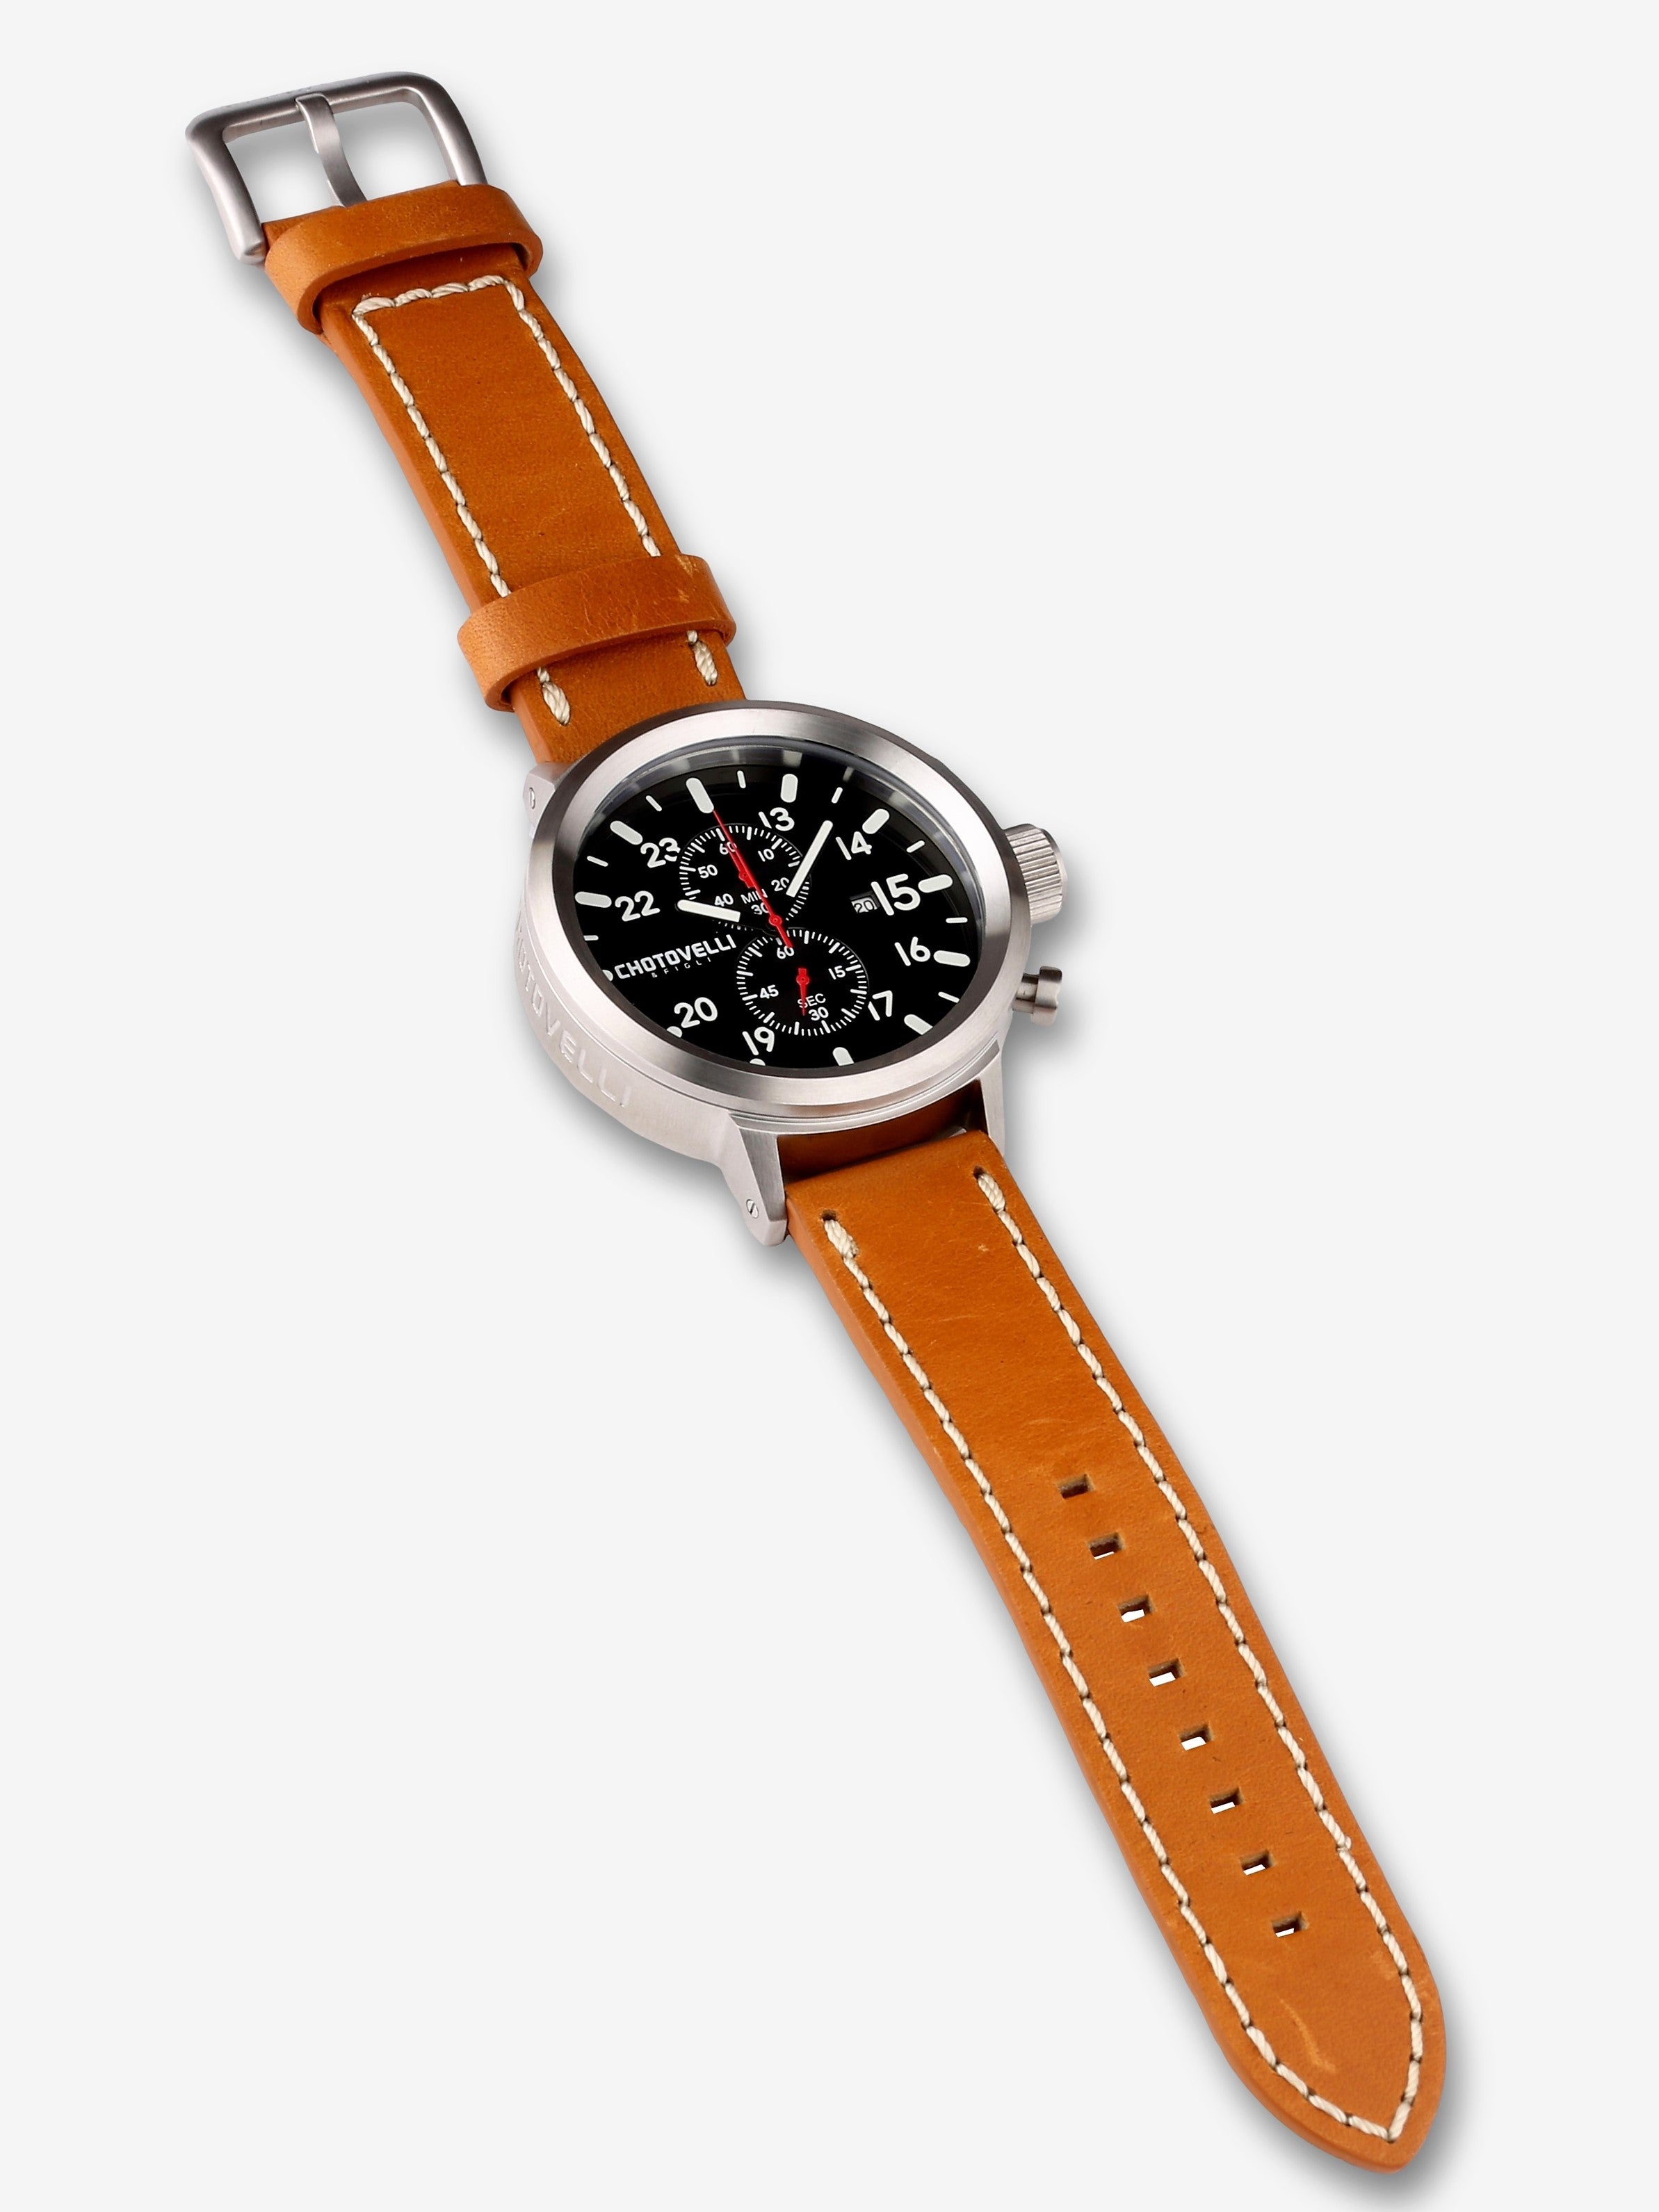 Bristol Watch Company - Our 747 Tribute Chronograph. Actual KLM 747  airframe artifact displayed in case back. Swiss movement. Limited edition.  Details at https://buff.ly/3MBqeYc #aviatorwatch #pilotwatch  #bristolwatchcompany #747 #menswatch | Facebook